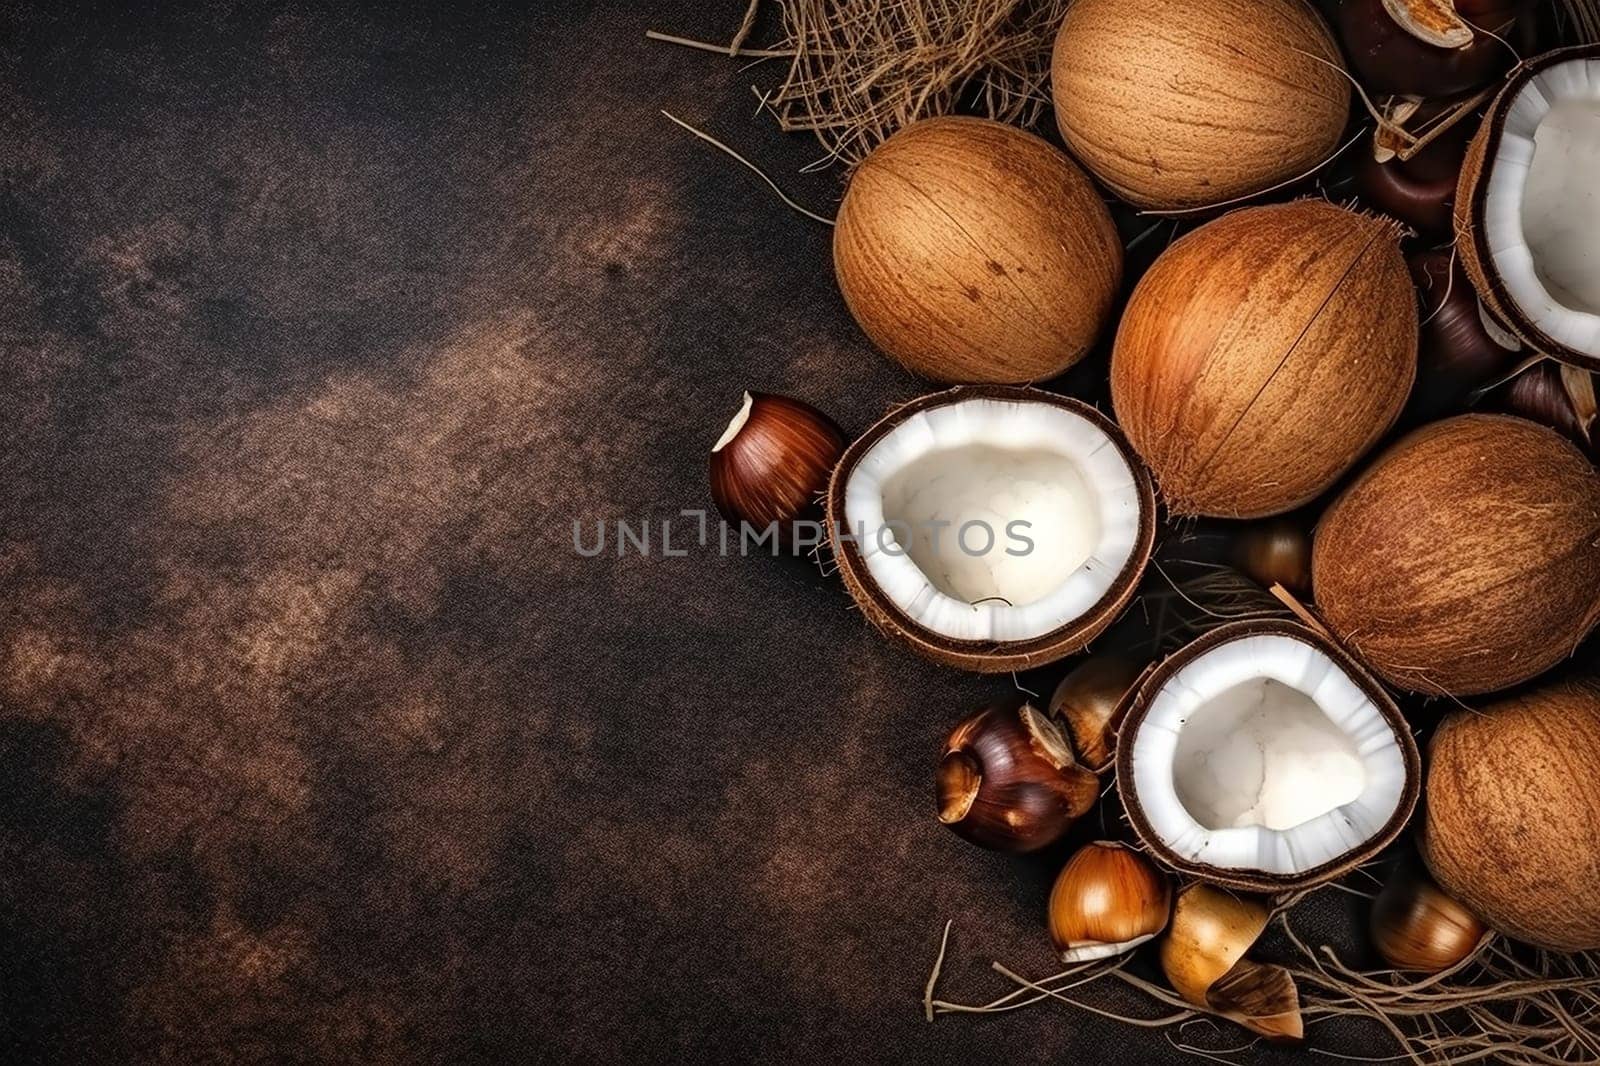 Assortment of whole and halved nuts with hard shells on a textured background. by Hype2art